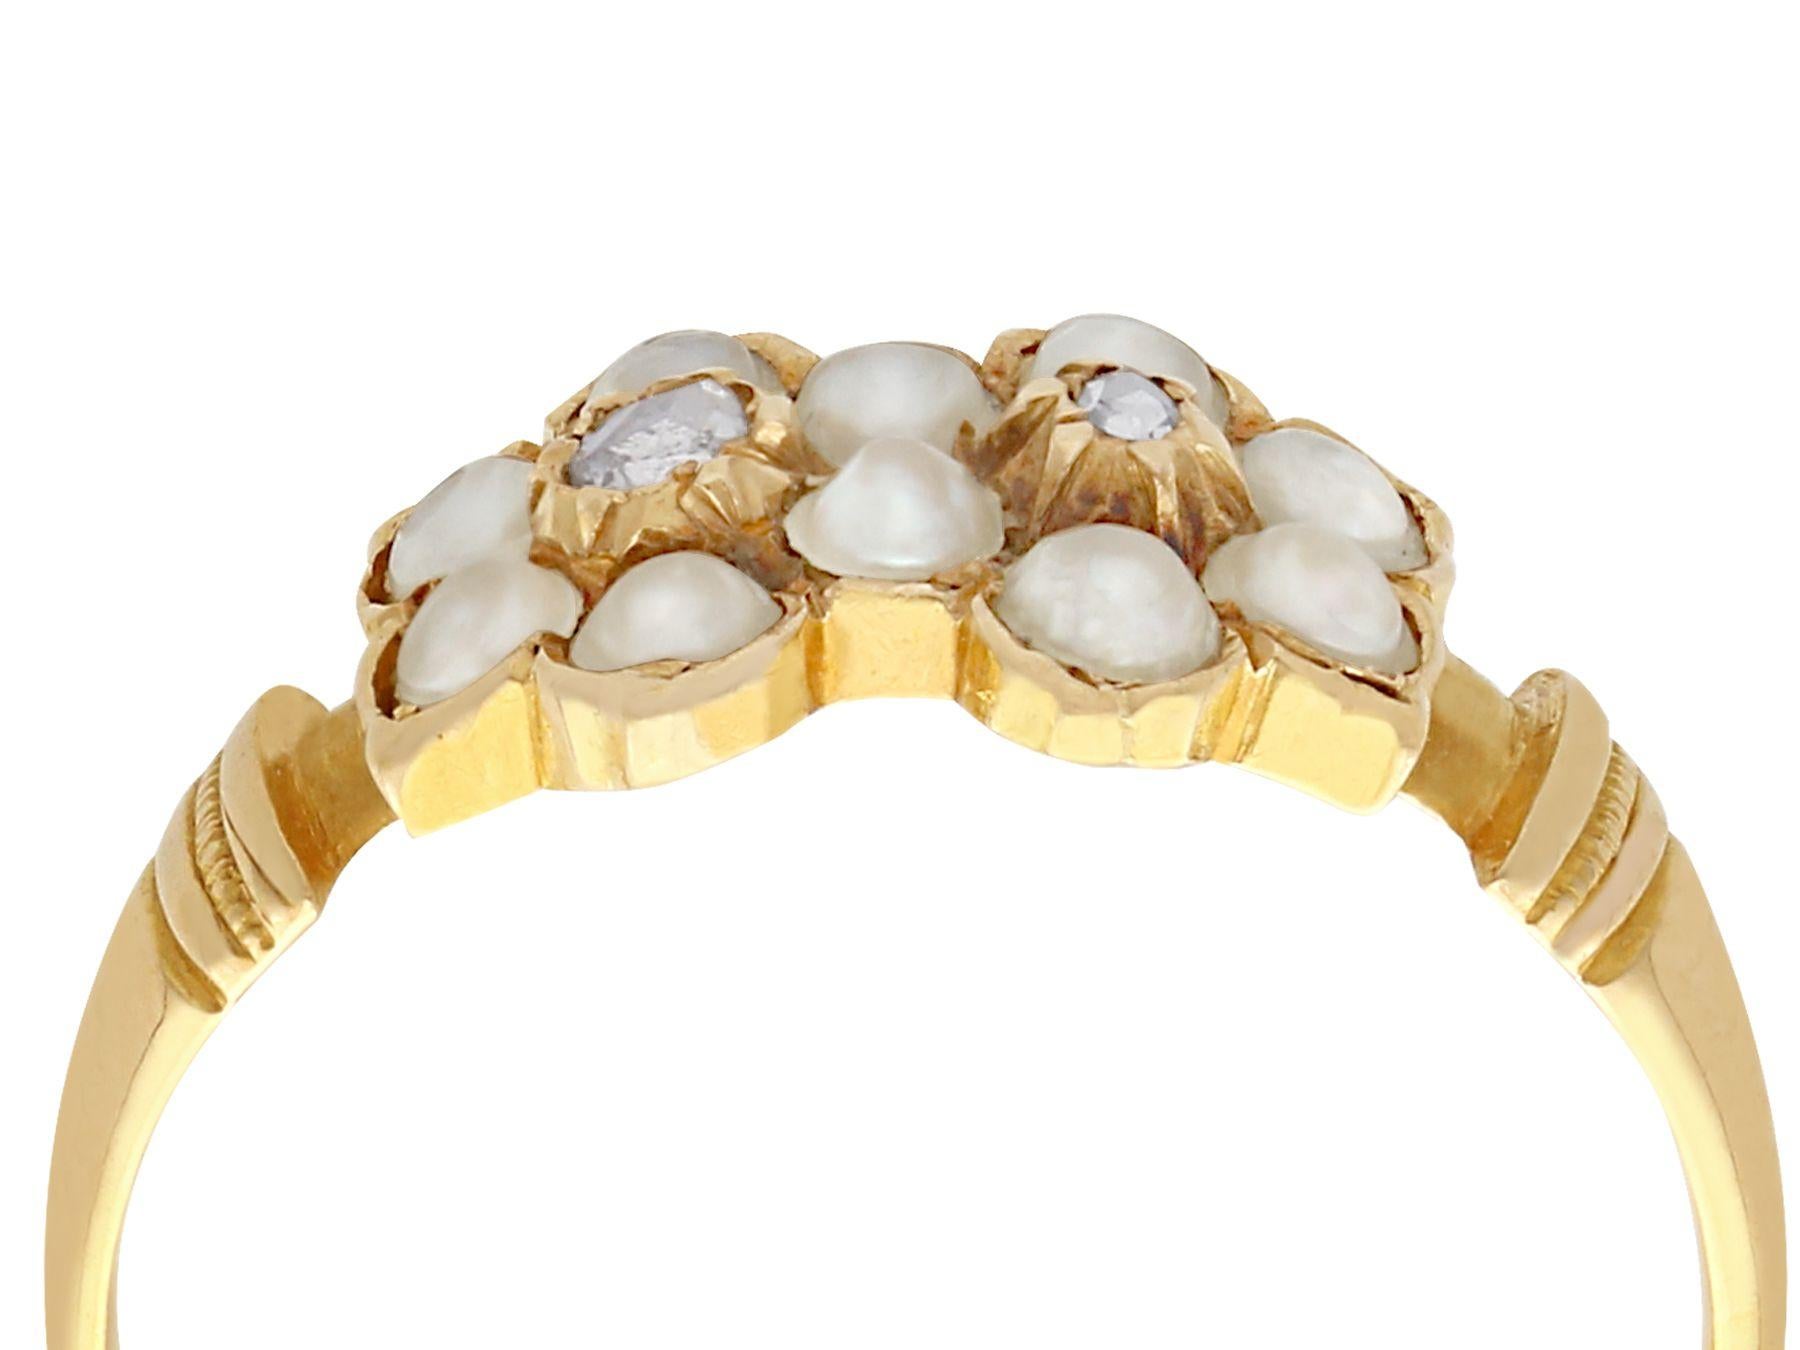 A fine and impressive antique Victorian seed pearl and 0.05 carat diamond and 18 karat yellow gold dress ring; part of our antique jewelry/estate jewelry collections.

This fine antique dress ring has been crafted in 18k yellow gold.

The impressive